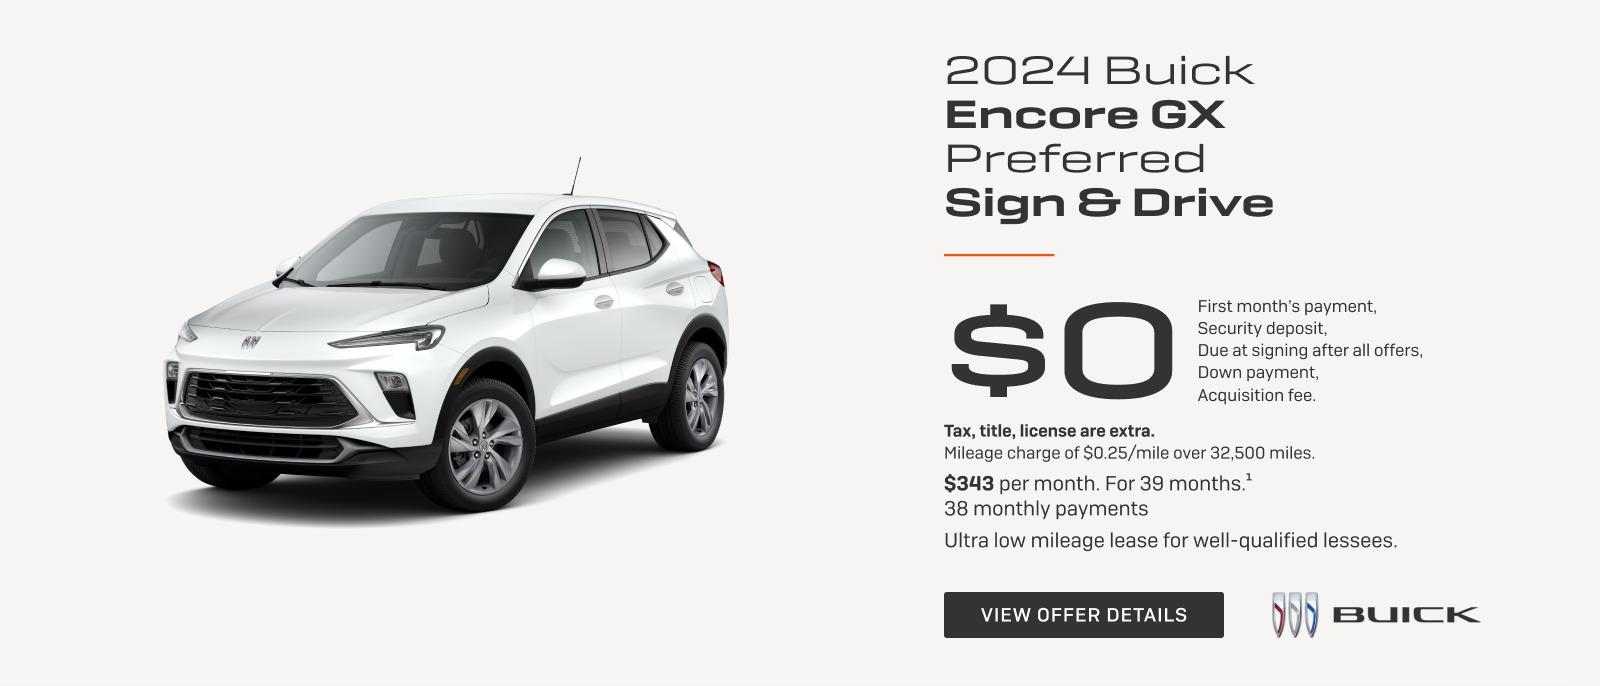 SIGN & DRIVE

$0
FIRST MONTH'S PAYMENT
SECURITY DEPOSIT
DUE AT LEASE SIGNING AFTER ALL OFFERS
DOWN PAYMENT
ACQUISITION FEE

Tax, title, license are extra. 
Mileage charge of $0.25/mile over 32,500 miles.

$343 per month. For 39 months.1
38 monthly payments

Ultra low mileage lease for well-qualified lessees.